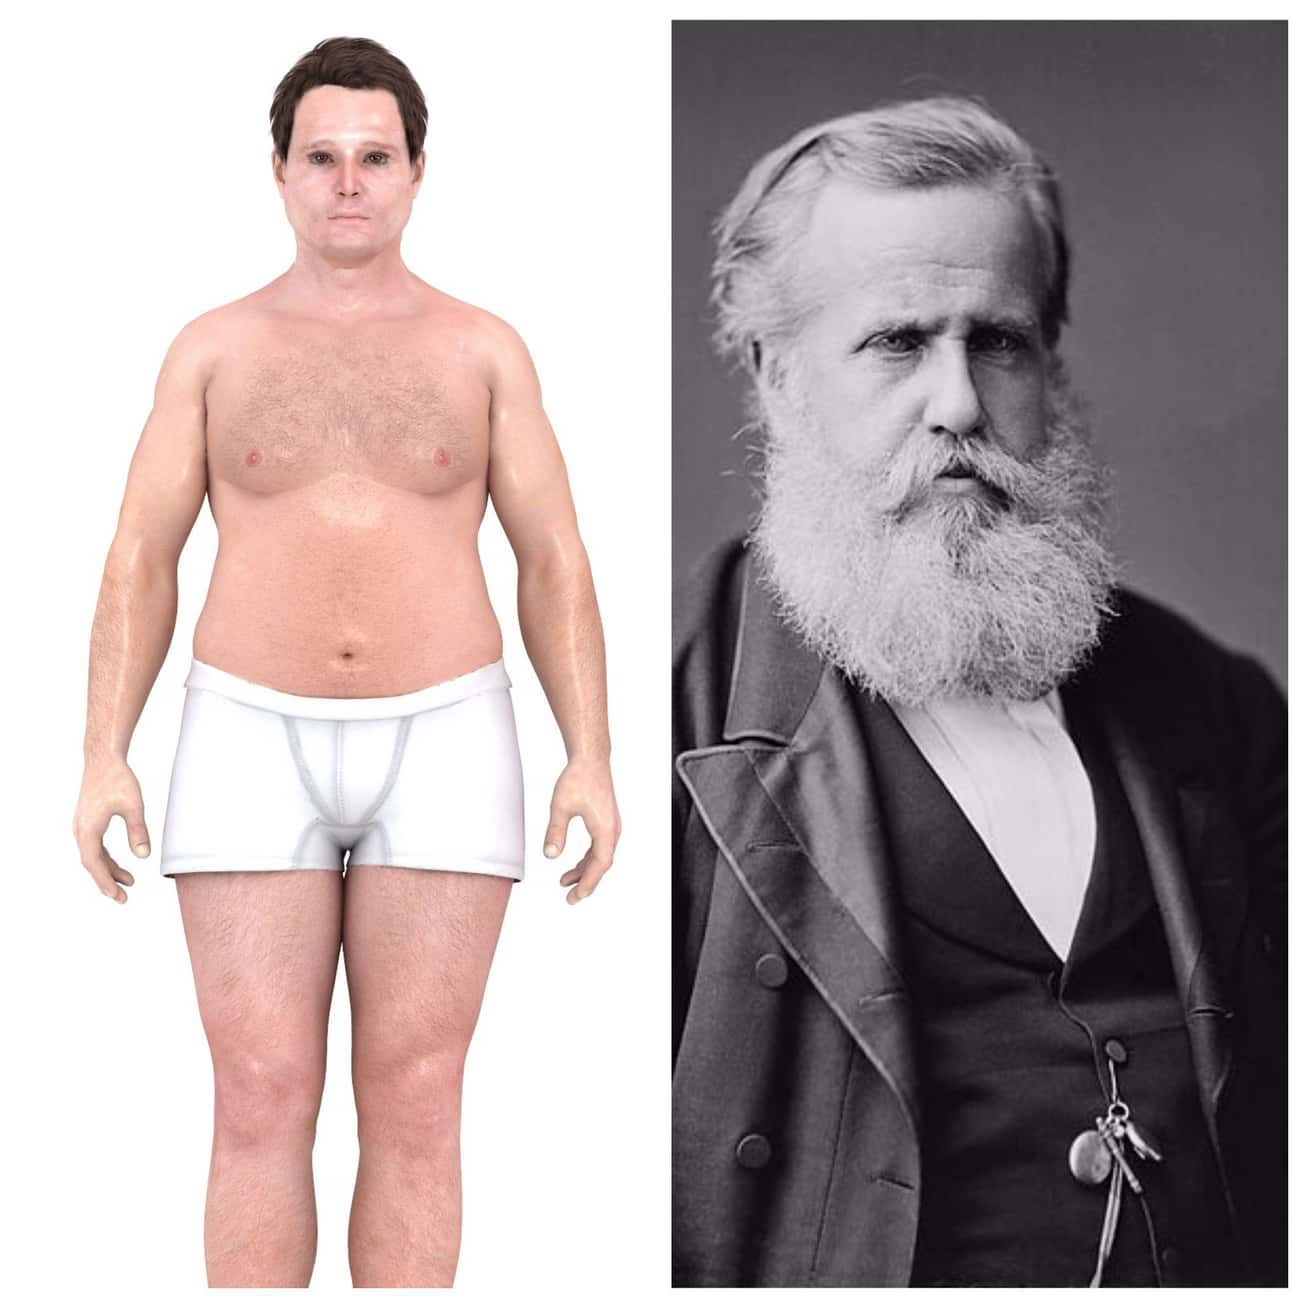 1870s: Heavyset Bodies Signified Wealth